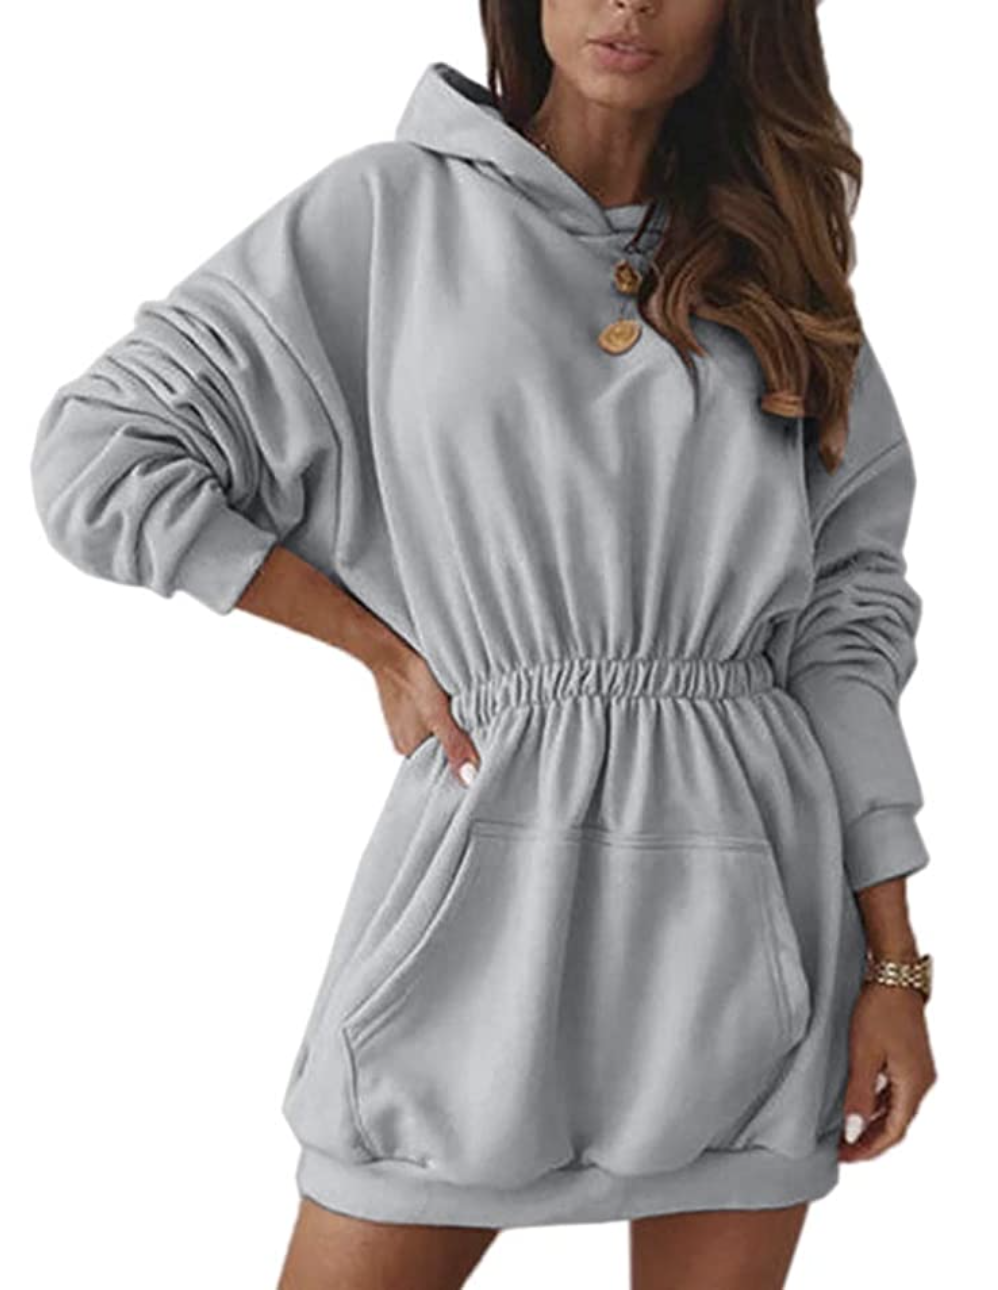 Fessceruna Cinched Sweatshirt Dress Avoids the Typical Boxy Look